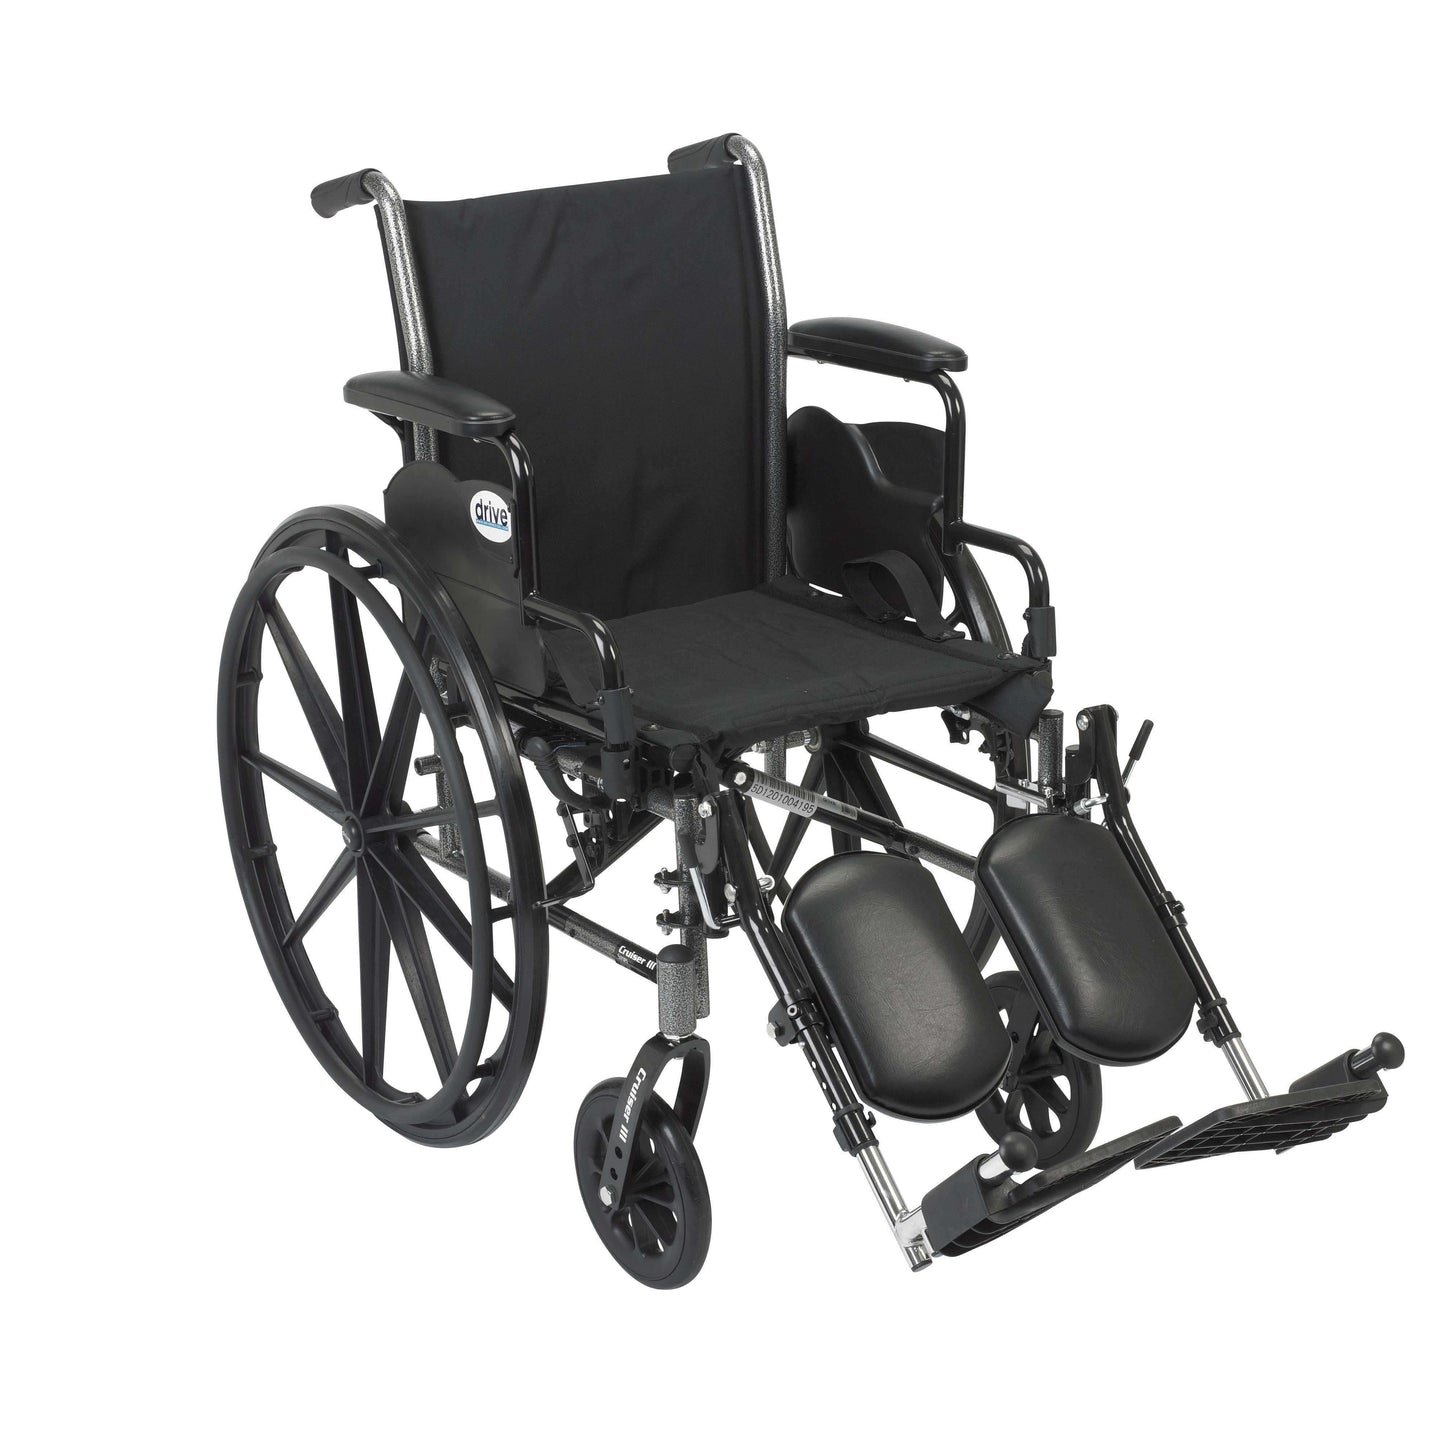 Drive k318dda-elr Cruiser III Light Weight Wheelchair with Flip Back Removable Arms, Desk Arms, Elevating Leg Rests, 18" Seat